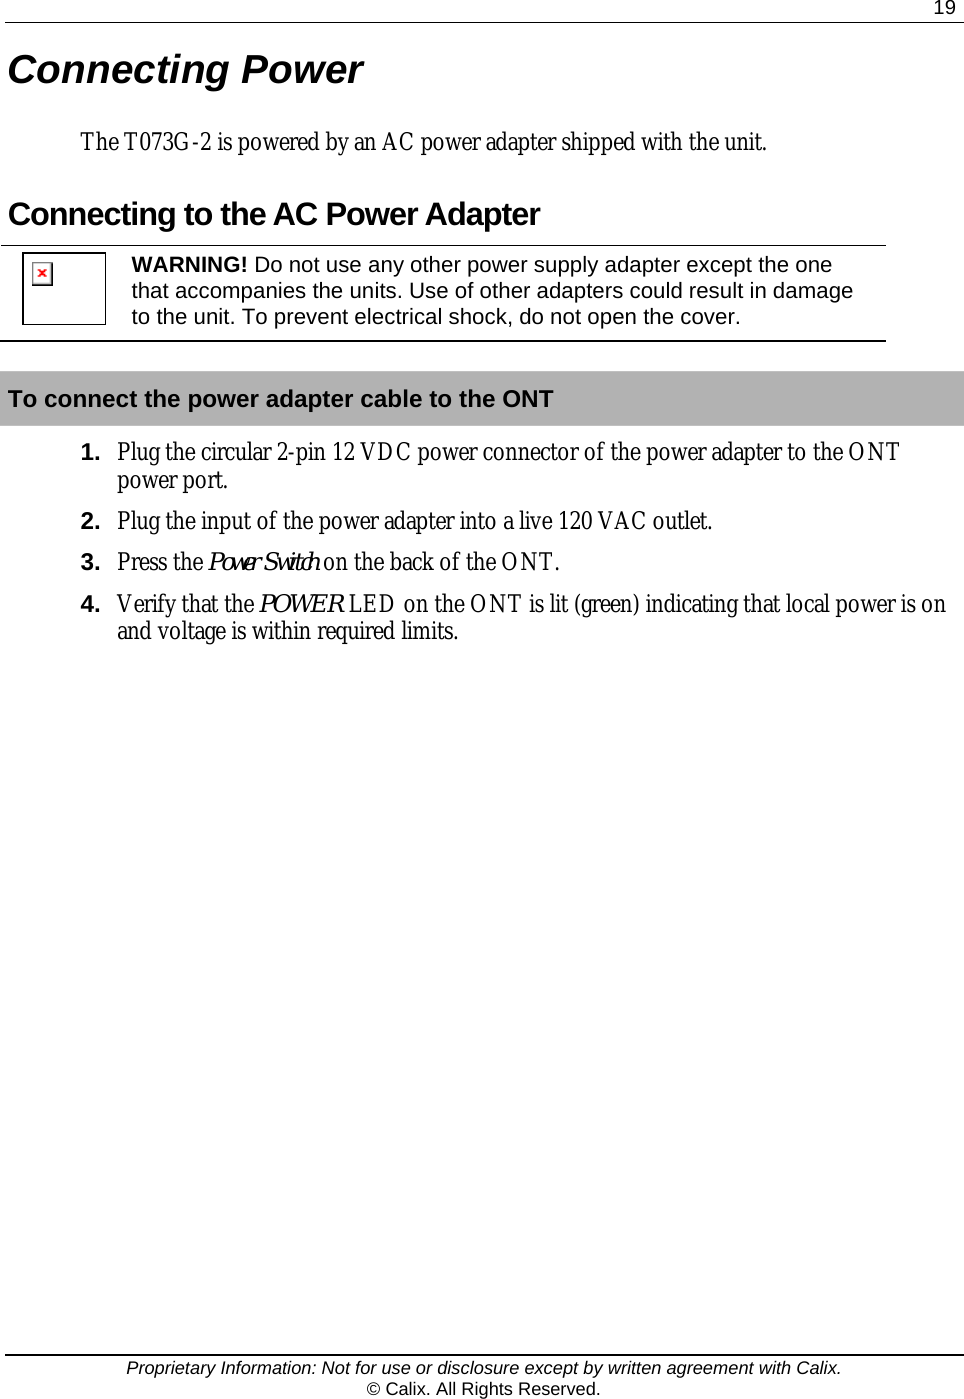  19  Proprietary Information: Not for use or disclosure except by written agreement with Calix. © Calix. All Rights Reserved. Connecting Power The T073G-2 is powered by an AC power adapter shipped with the unit.  Connecting to the AC Power Adapter  WARNING! Do not use any other power supply adapter except the one that accompanies the units. Use of other adapters could result in damage to the unit. To prevent electrical shock, do not open the cover.  To connect the power adapter cable to the ONT 1.  Plug the circular 2-pin 12 VDC power connector of the power adapter to the ONT power port. 2.  Plug the input of the power adapter into a live 120 VAC outlet. 3.  Press the Power Switch on the back of the ONT. 4.  Verify that the POWER LED on the ONT is lit (green) indicating that local power is on and voltage is within required limits.  